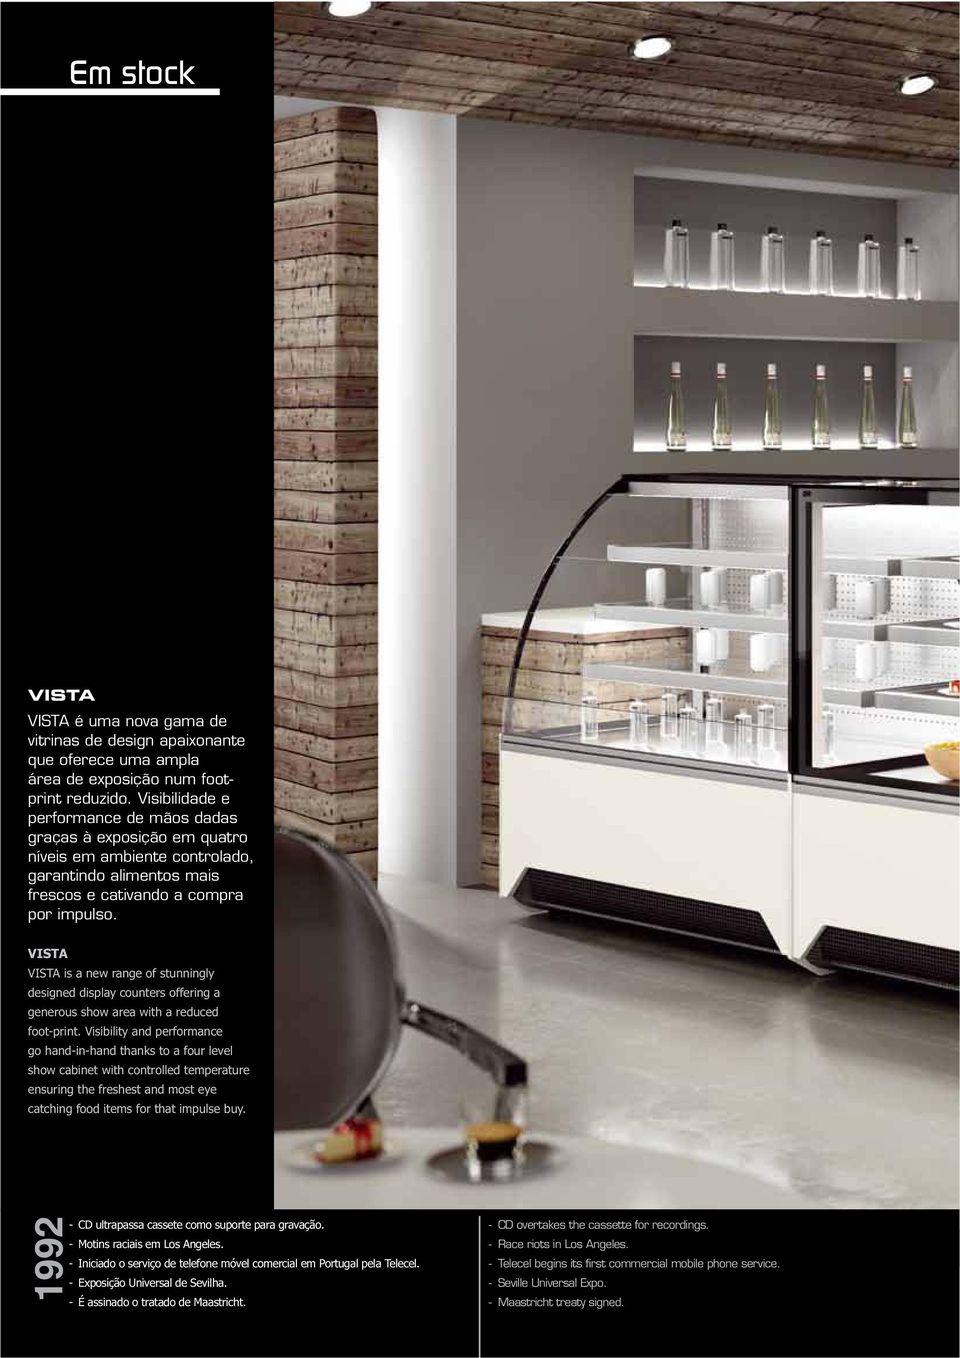 VISTA is a new range of stunningly designed display counters offering a generous show area with a reduced foot-print.